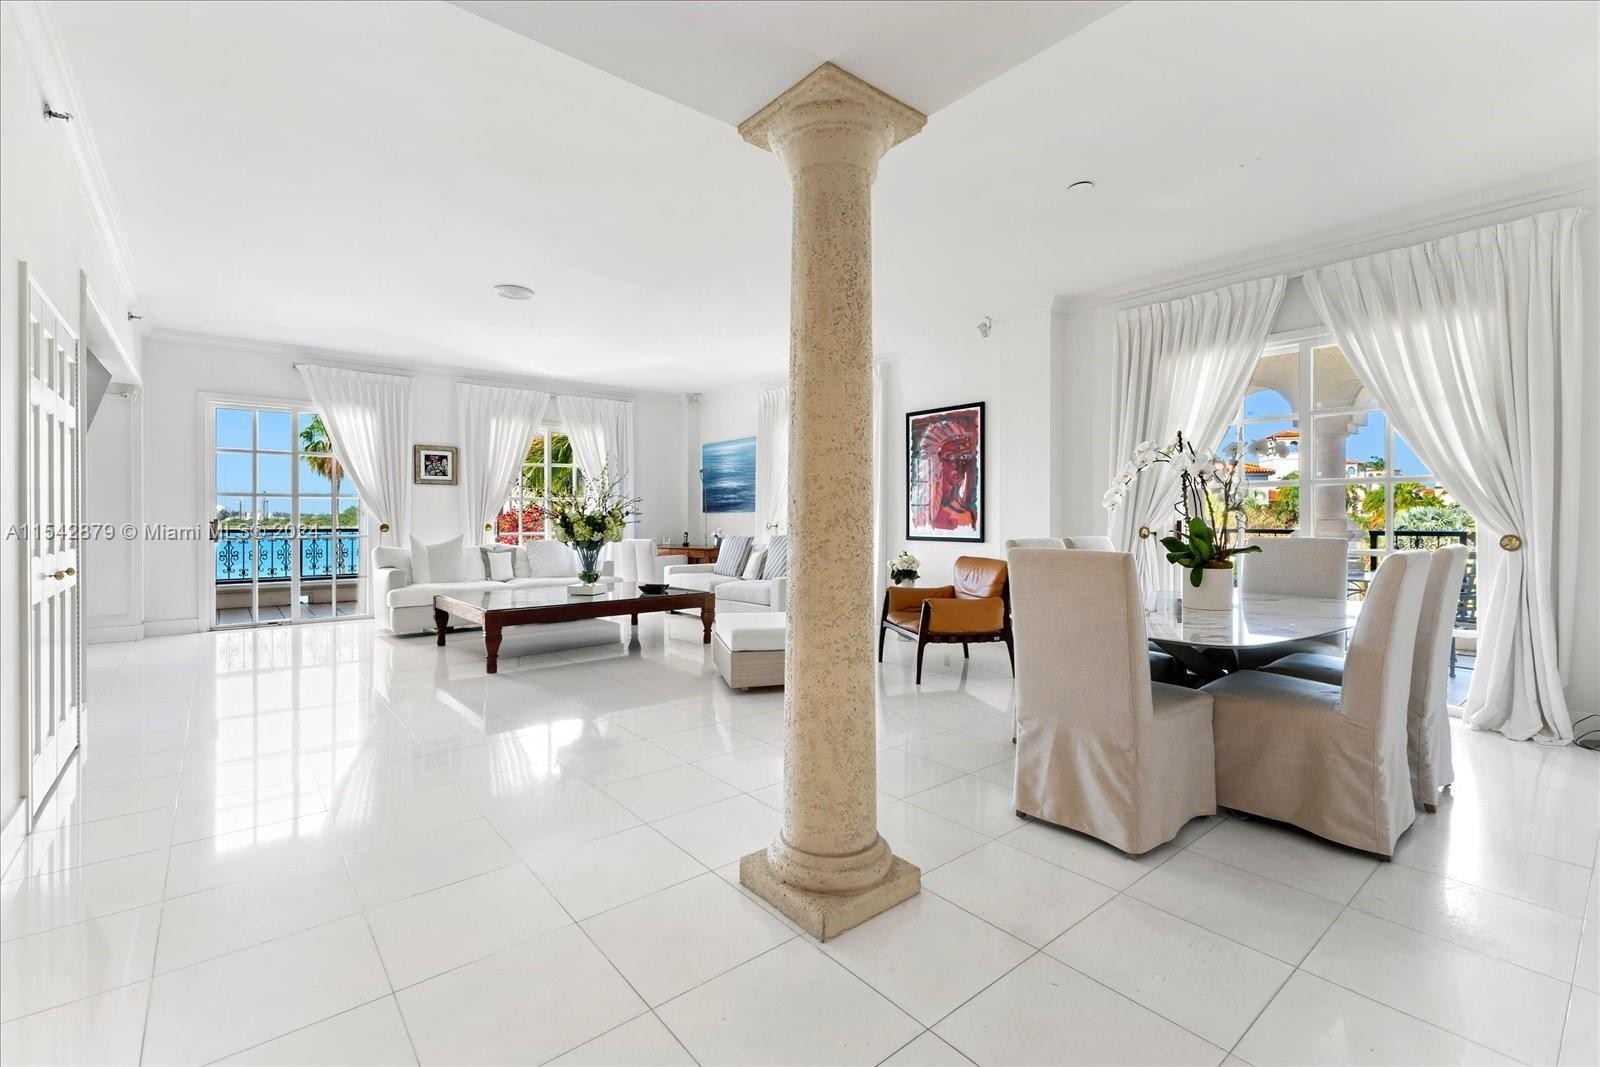 4. 2134 Fisher Island Dr